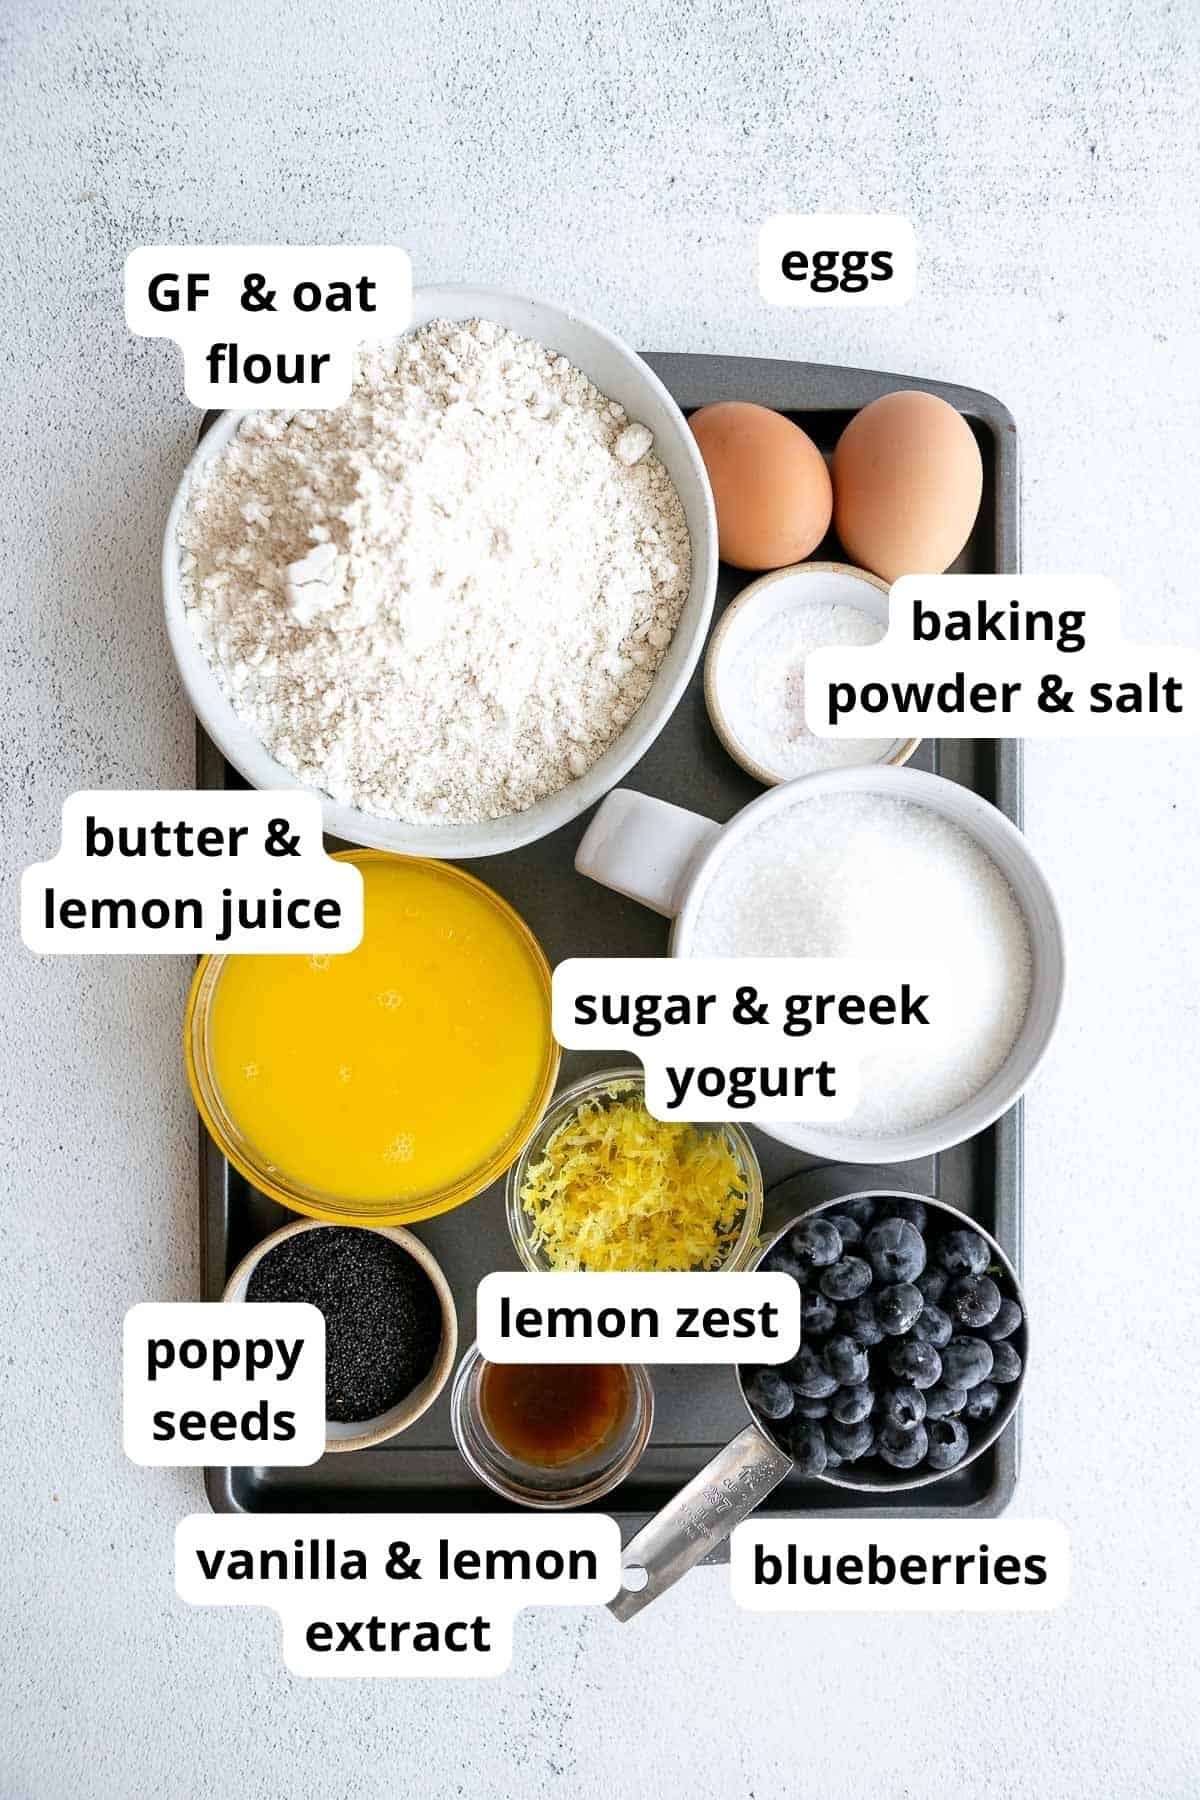 ingredients in bowls with labels